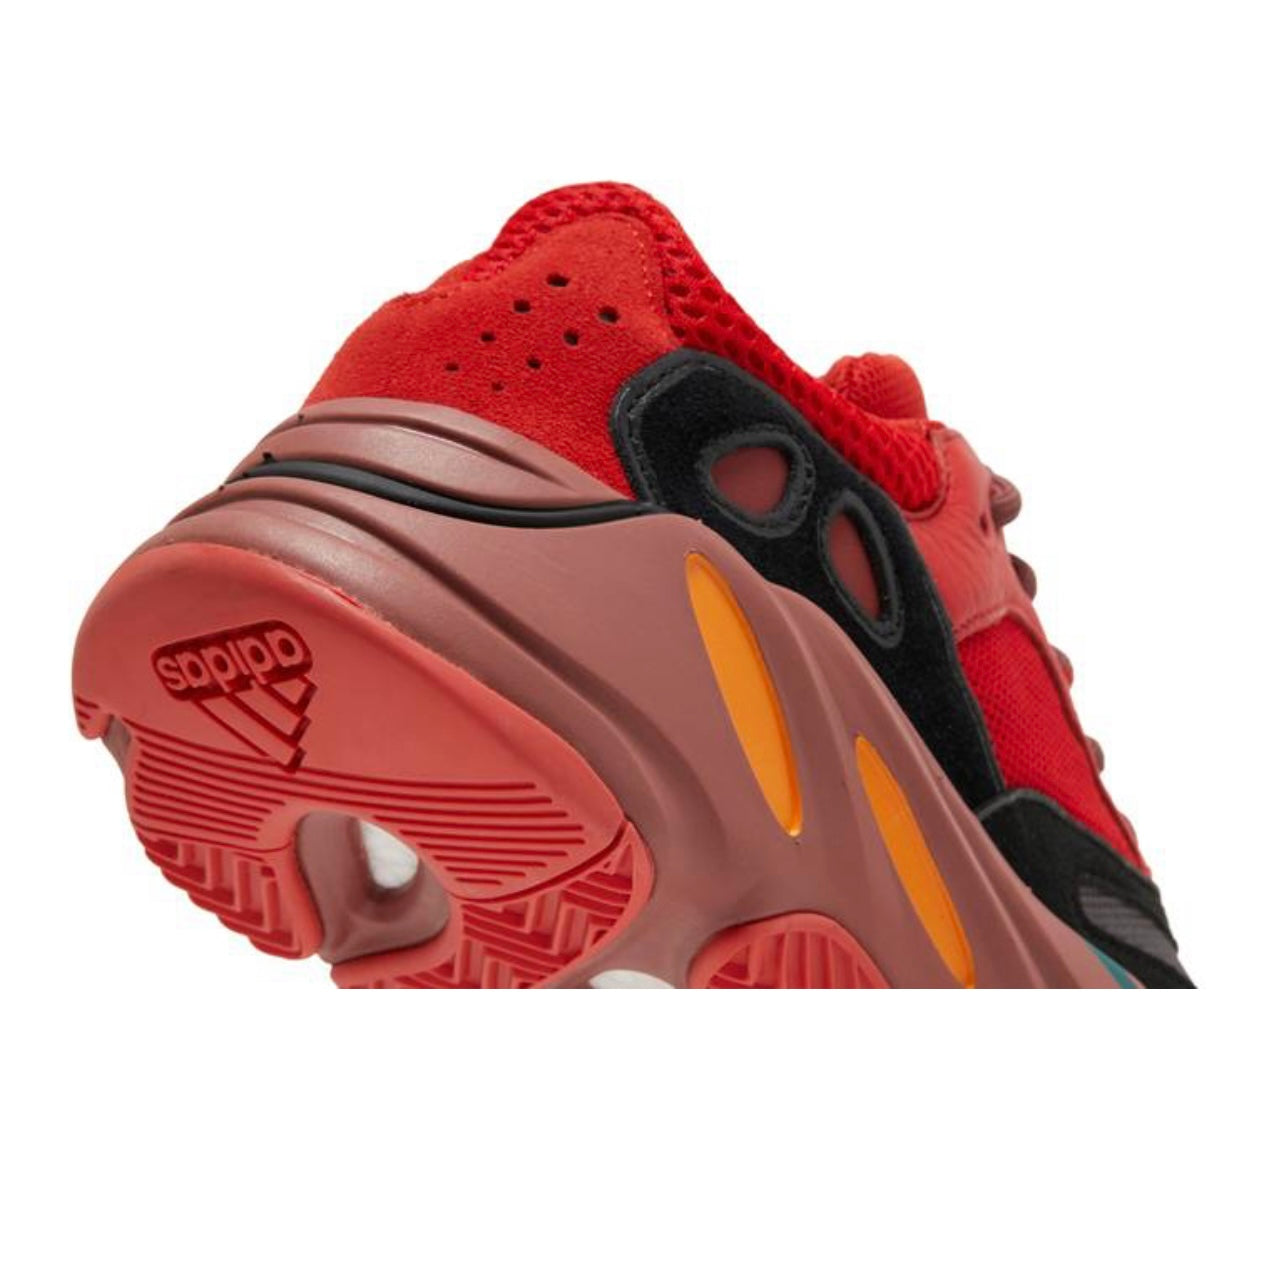 Adidas Yeezy Boost 700 "Hi-Res Red"